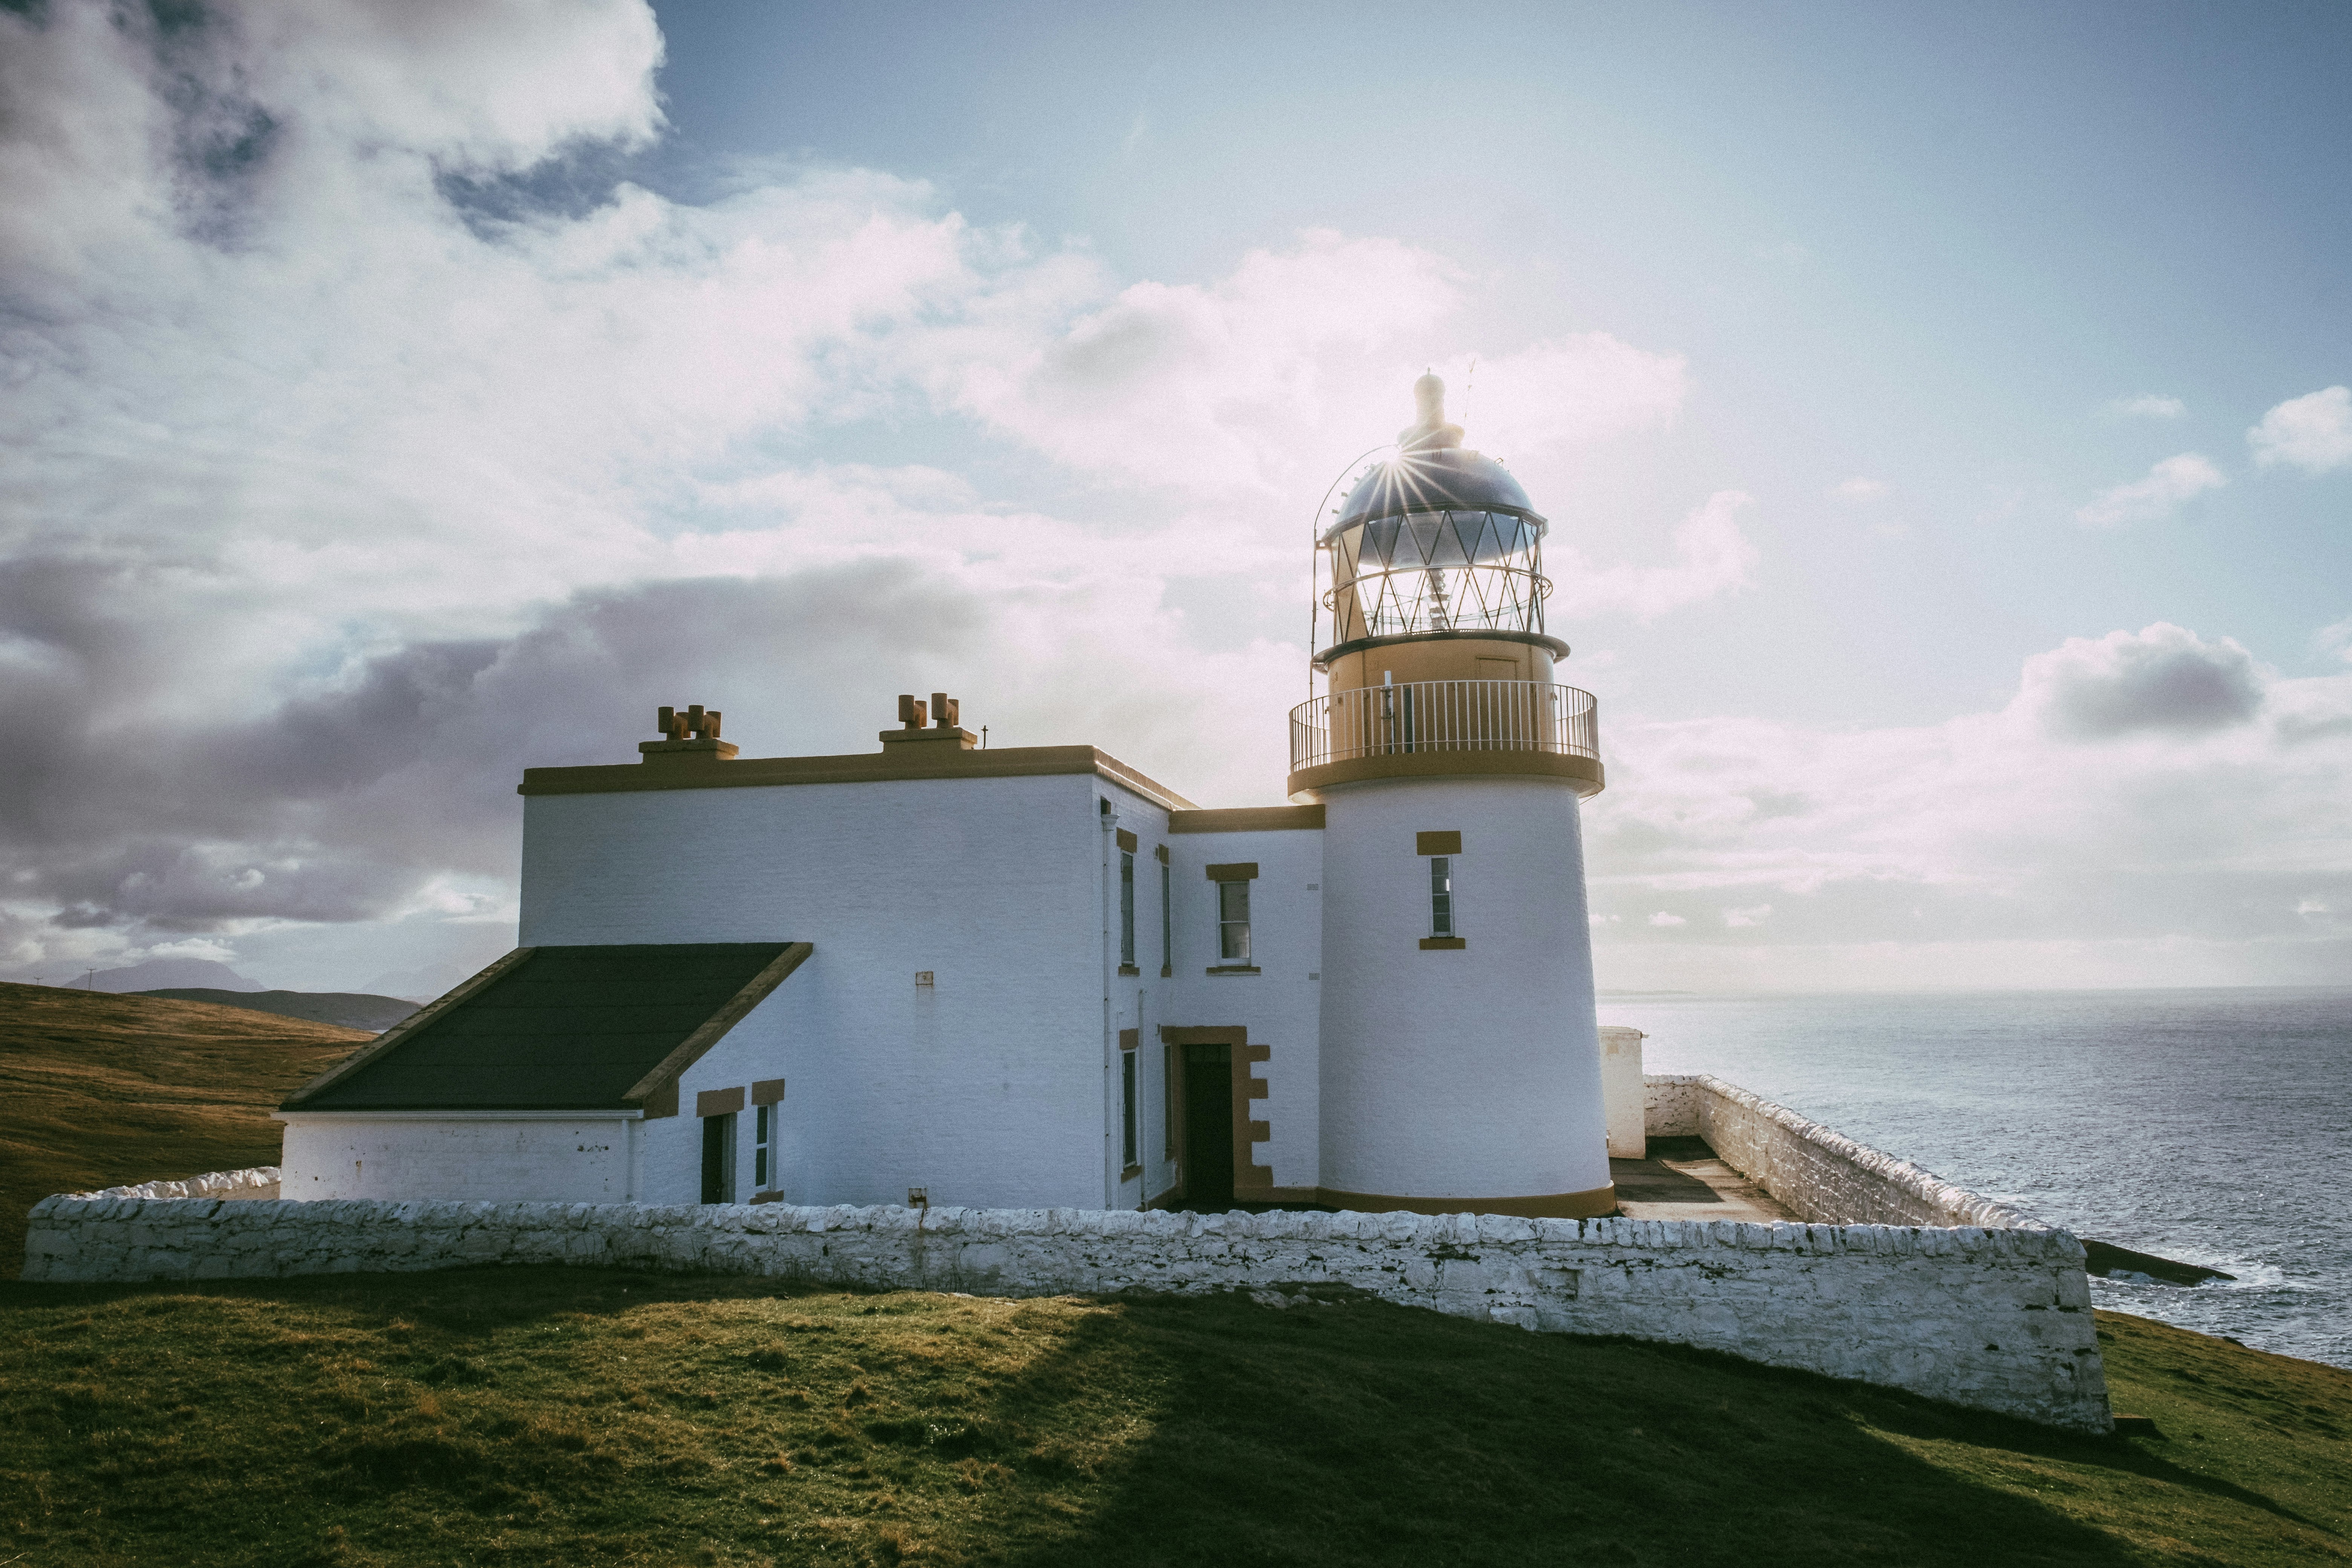 A photo of the side of Stoer Lighthouse during the daytime, underneath a cloudy sky.